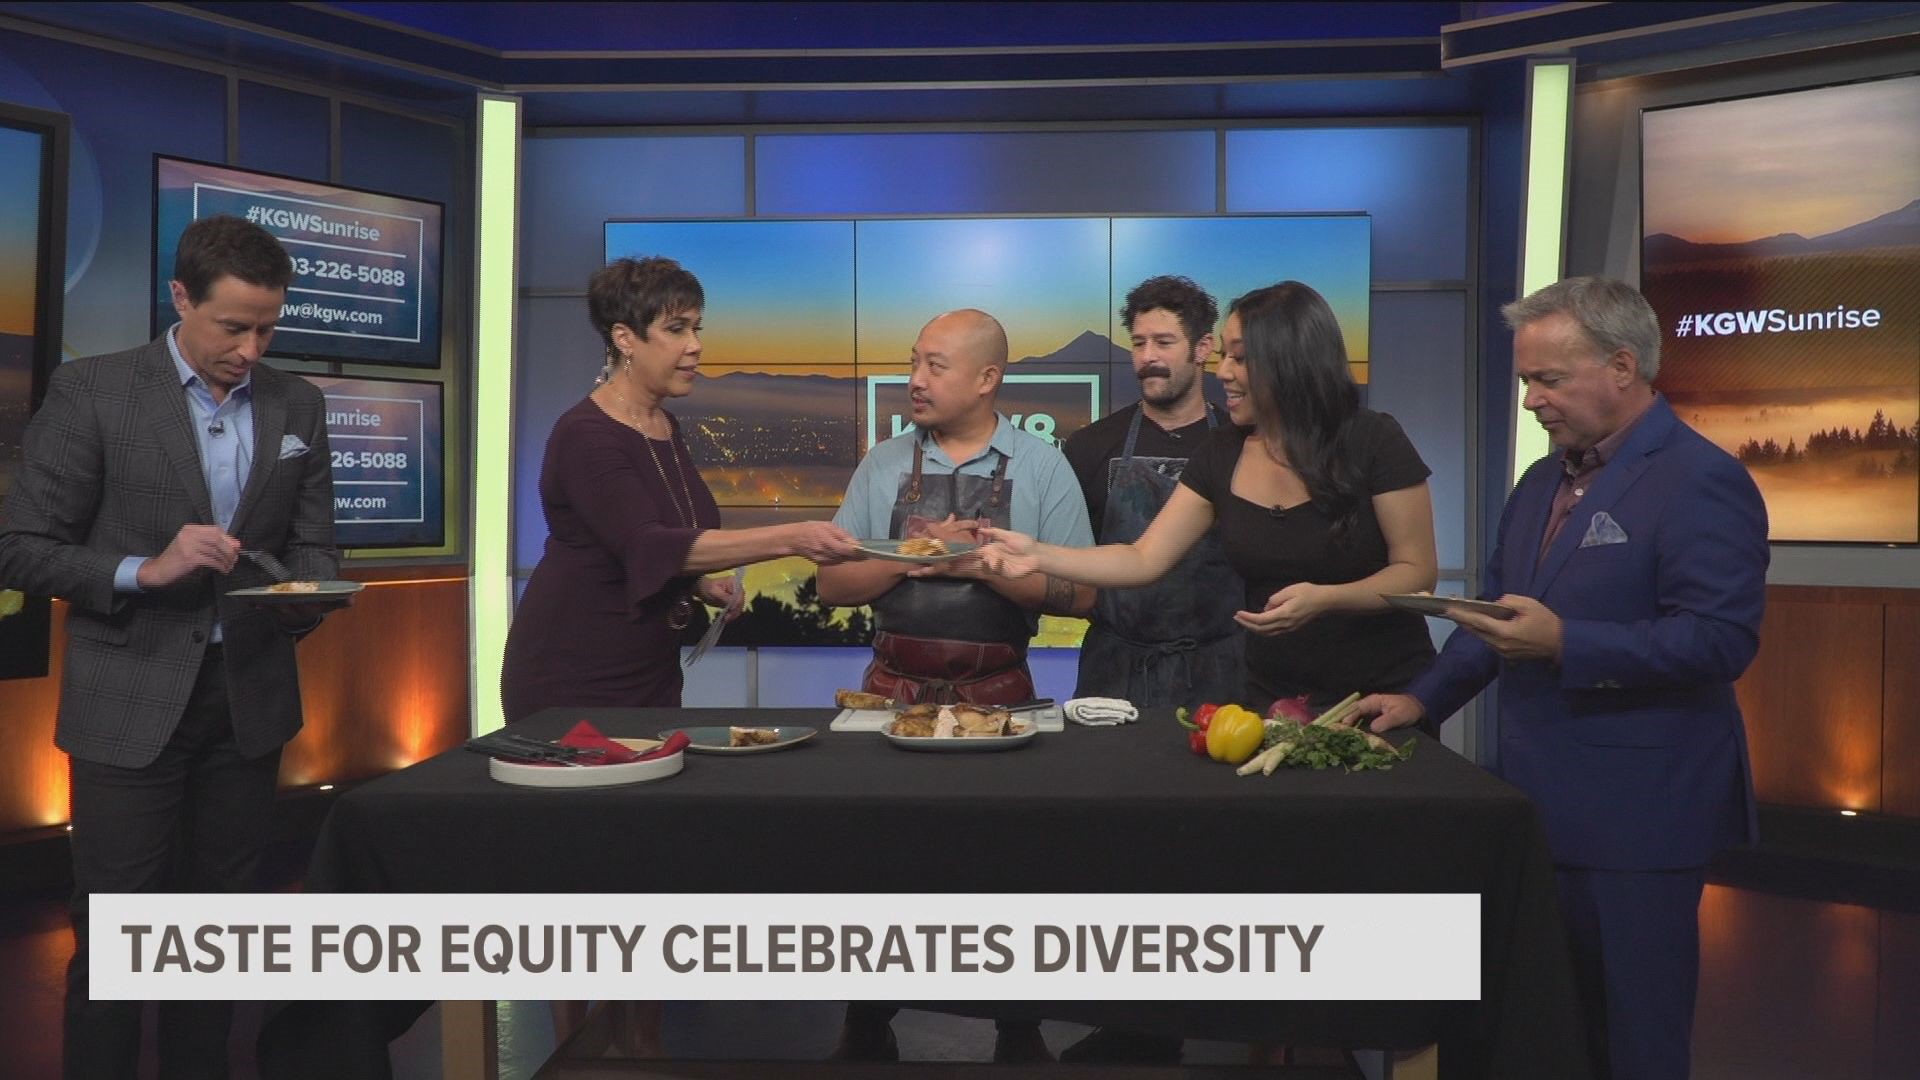 Lead chef of this year's gala Carlo Lamagna and assistant chef Roberto Almodovar visit the studio to share two dishes from Puerto Rican and Filipino cuisine.